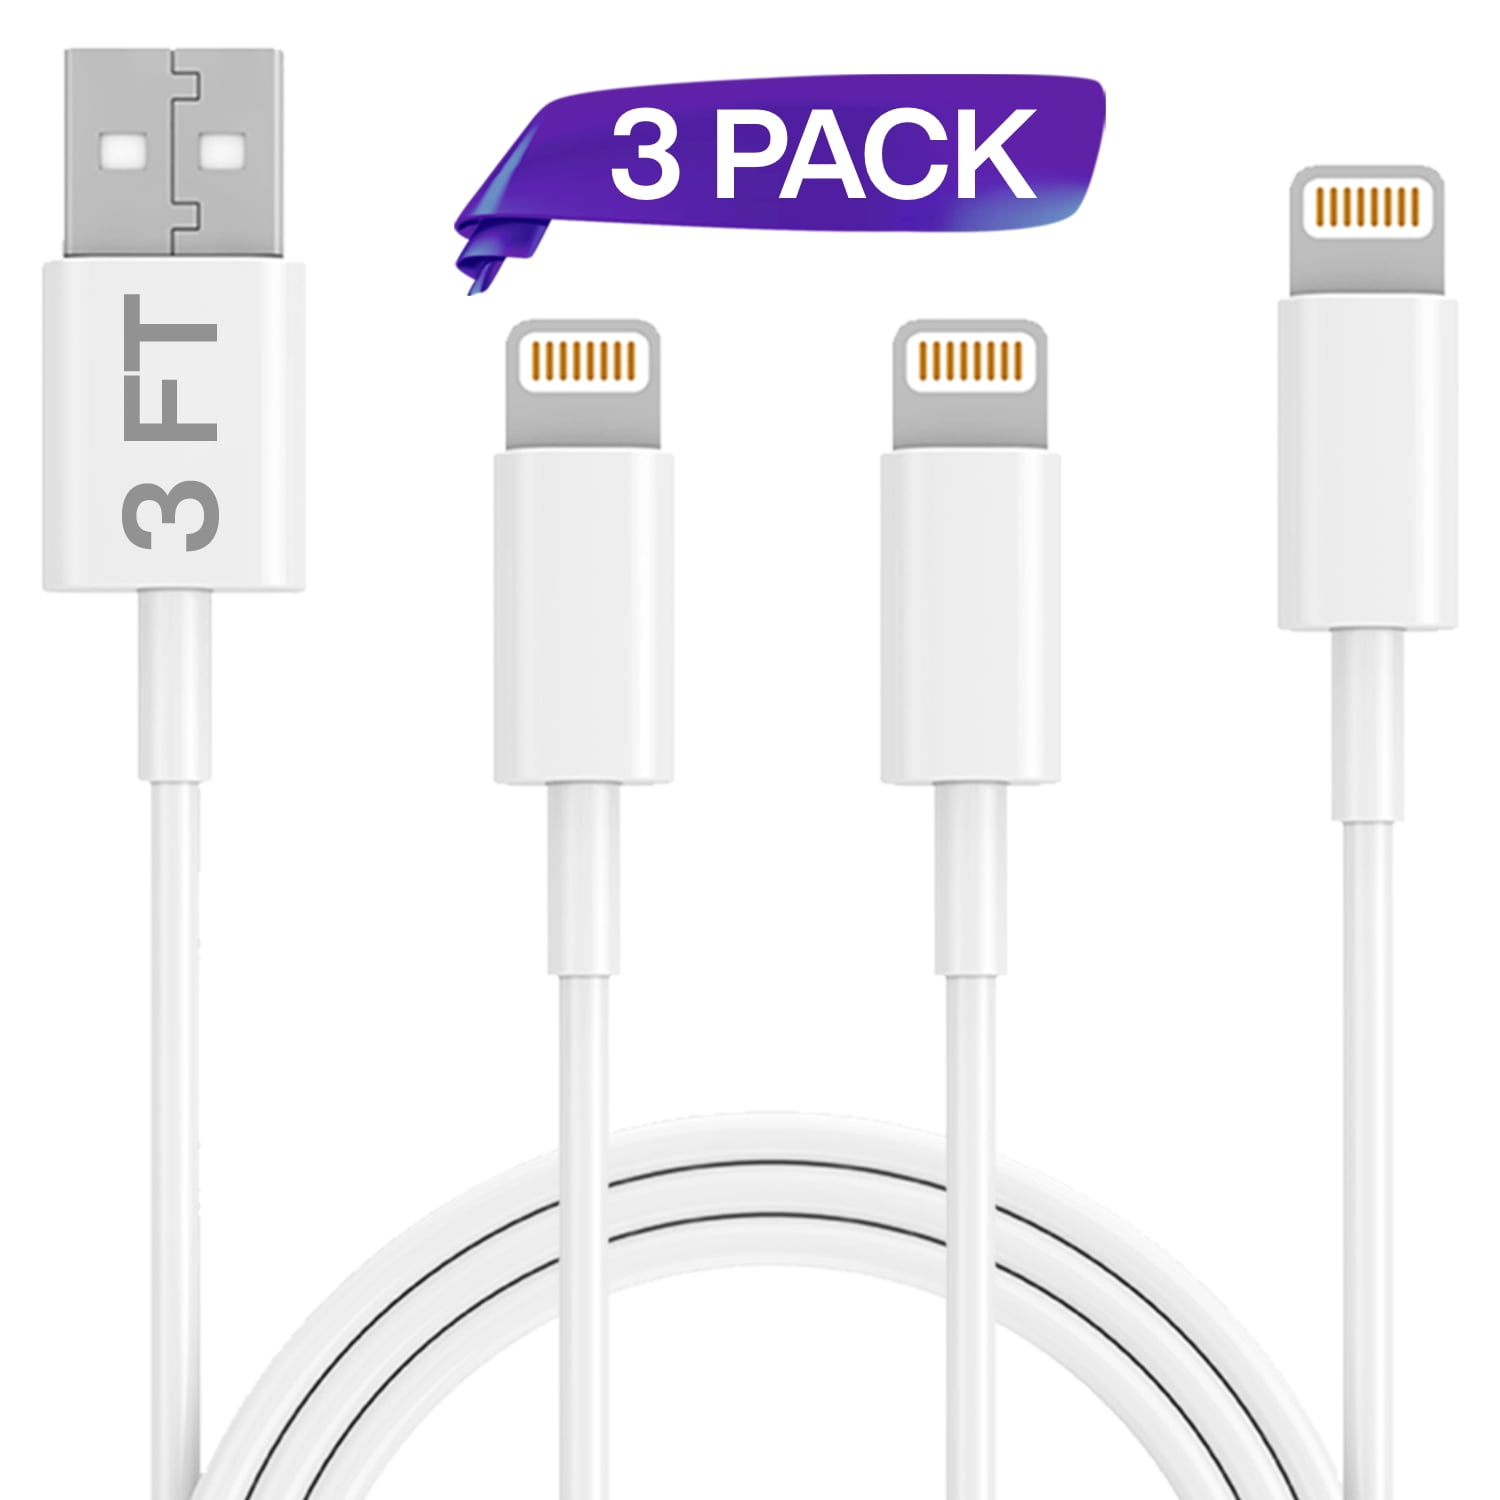 3/3/6/6/10FT MFi Certified iPhone Cable 5 Pack Extra Long Nylon Braided USB Charging&Syncing Cord Compatible with iPhone Xs Max/XS/XR/7/7Plus/X/8/8Plus/6S/6S Plus/SE Silver&Grey iPhone Charger